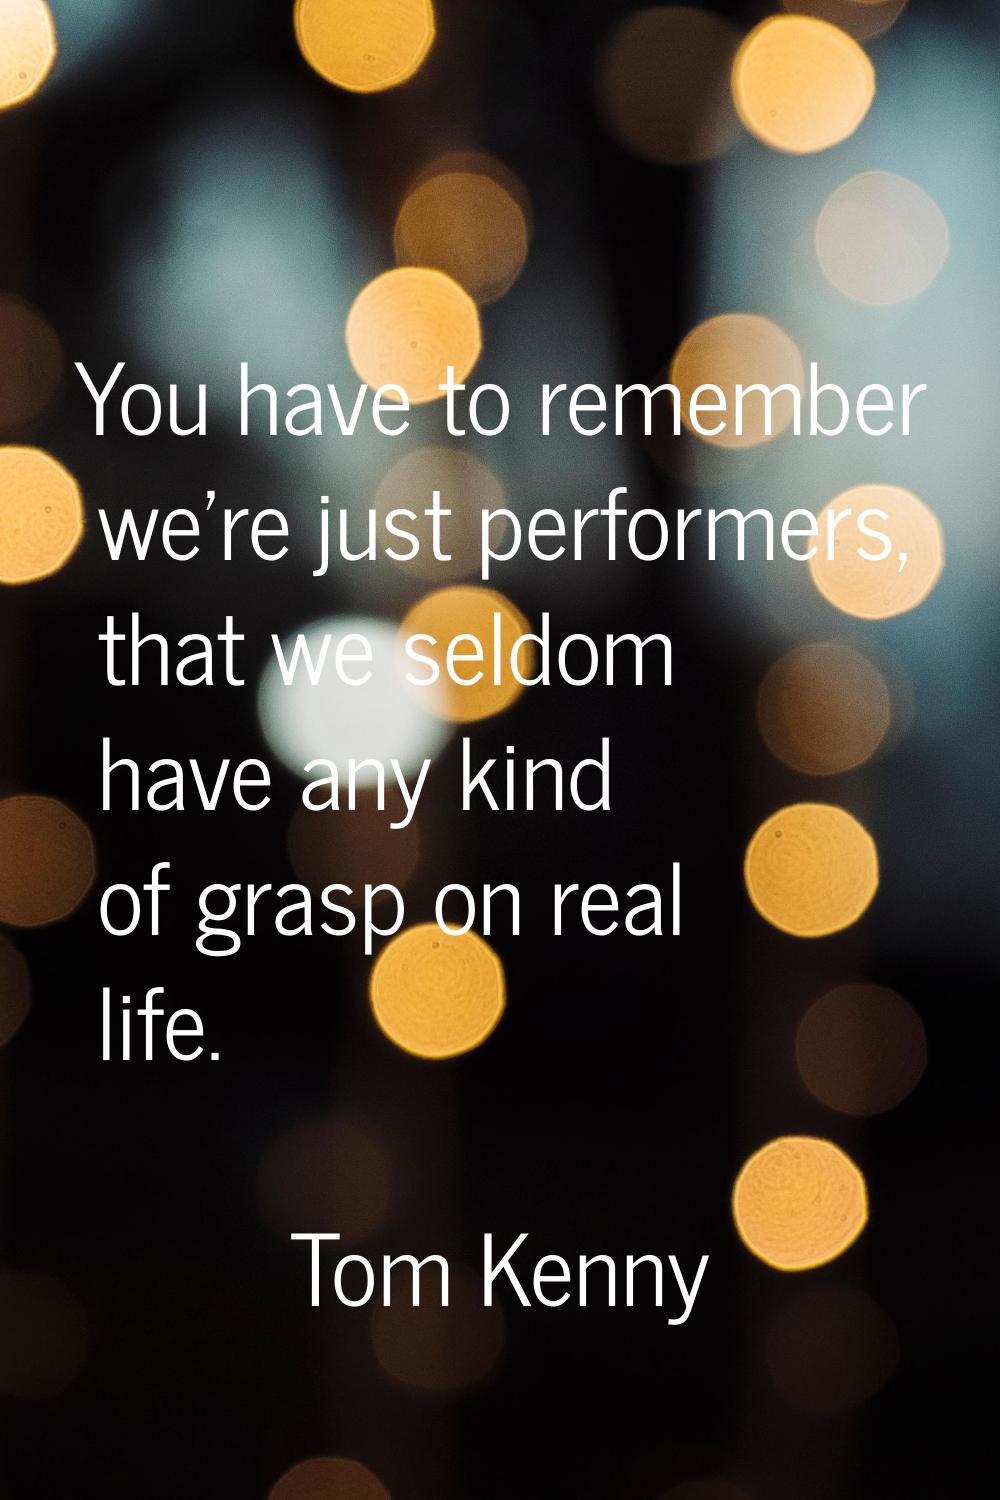 You have to remember we're just performers, that we seldom have any kind of grasp on real life.